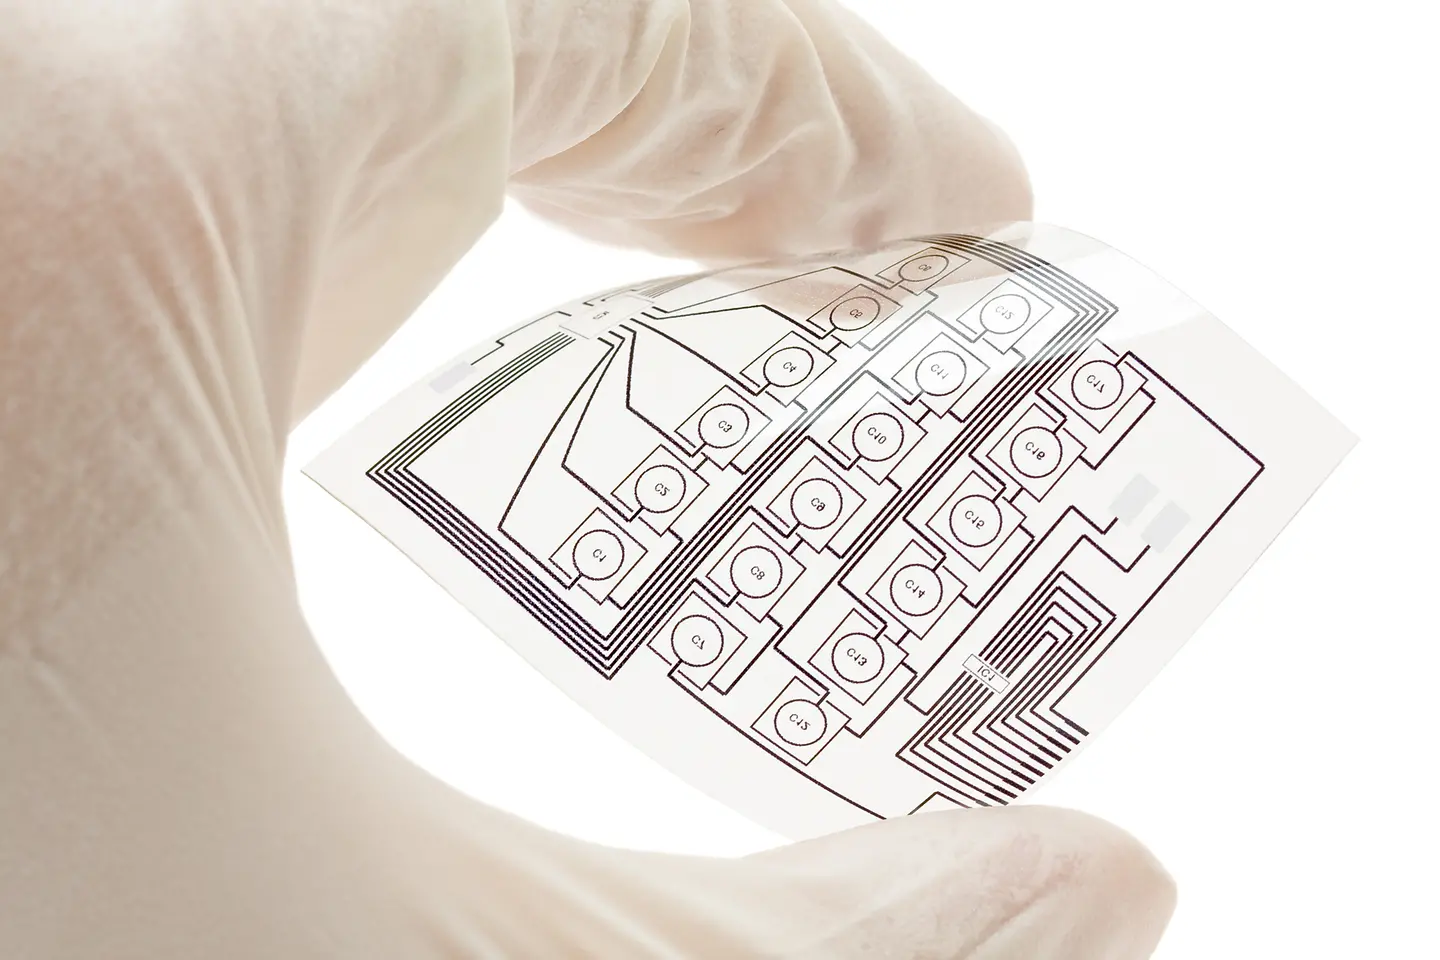 With highest levels of flexibility and efficiency, printed electronics makes new approaches in a variety of industries possible. 